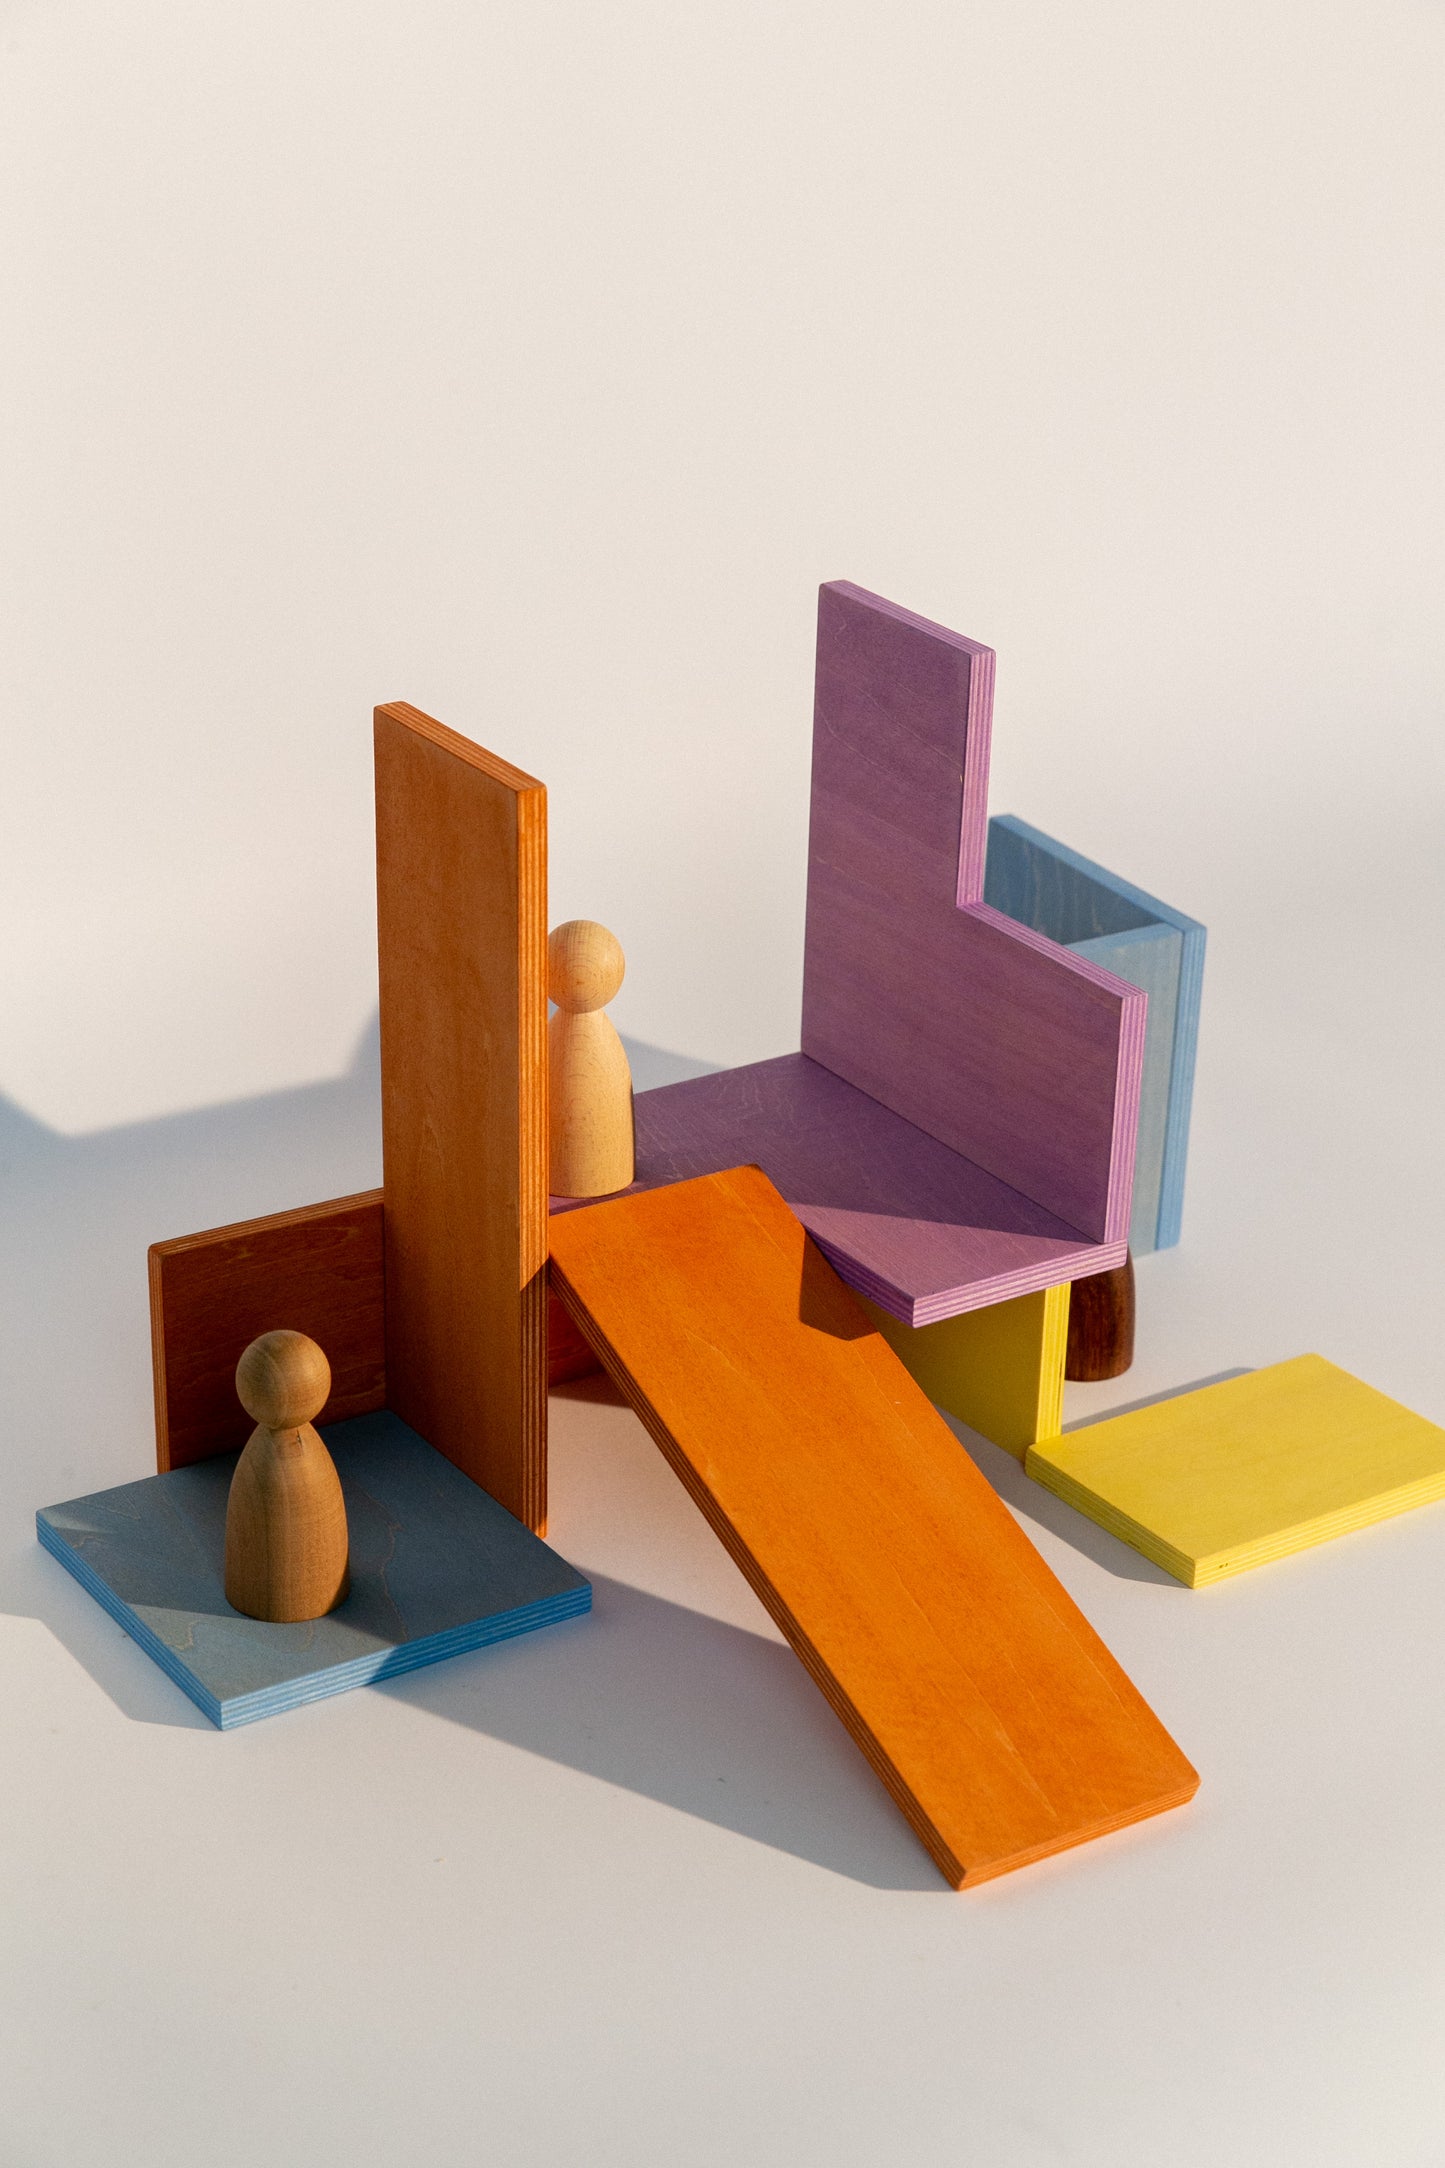 Architectural Block Sets by Avdar